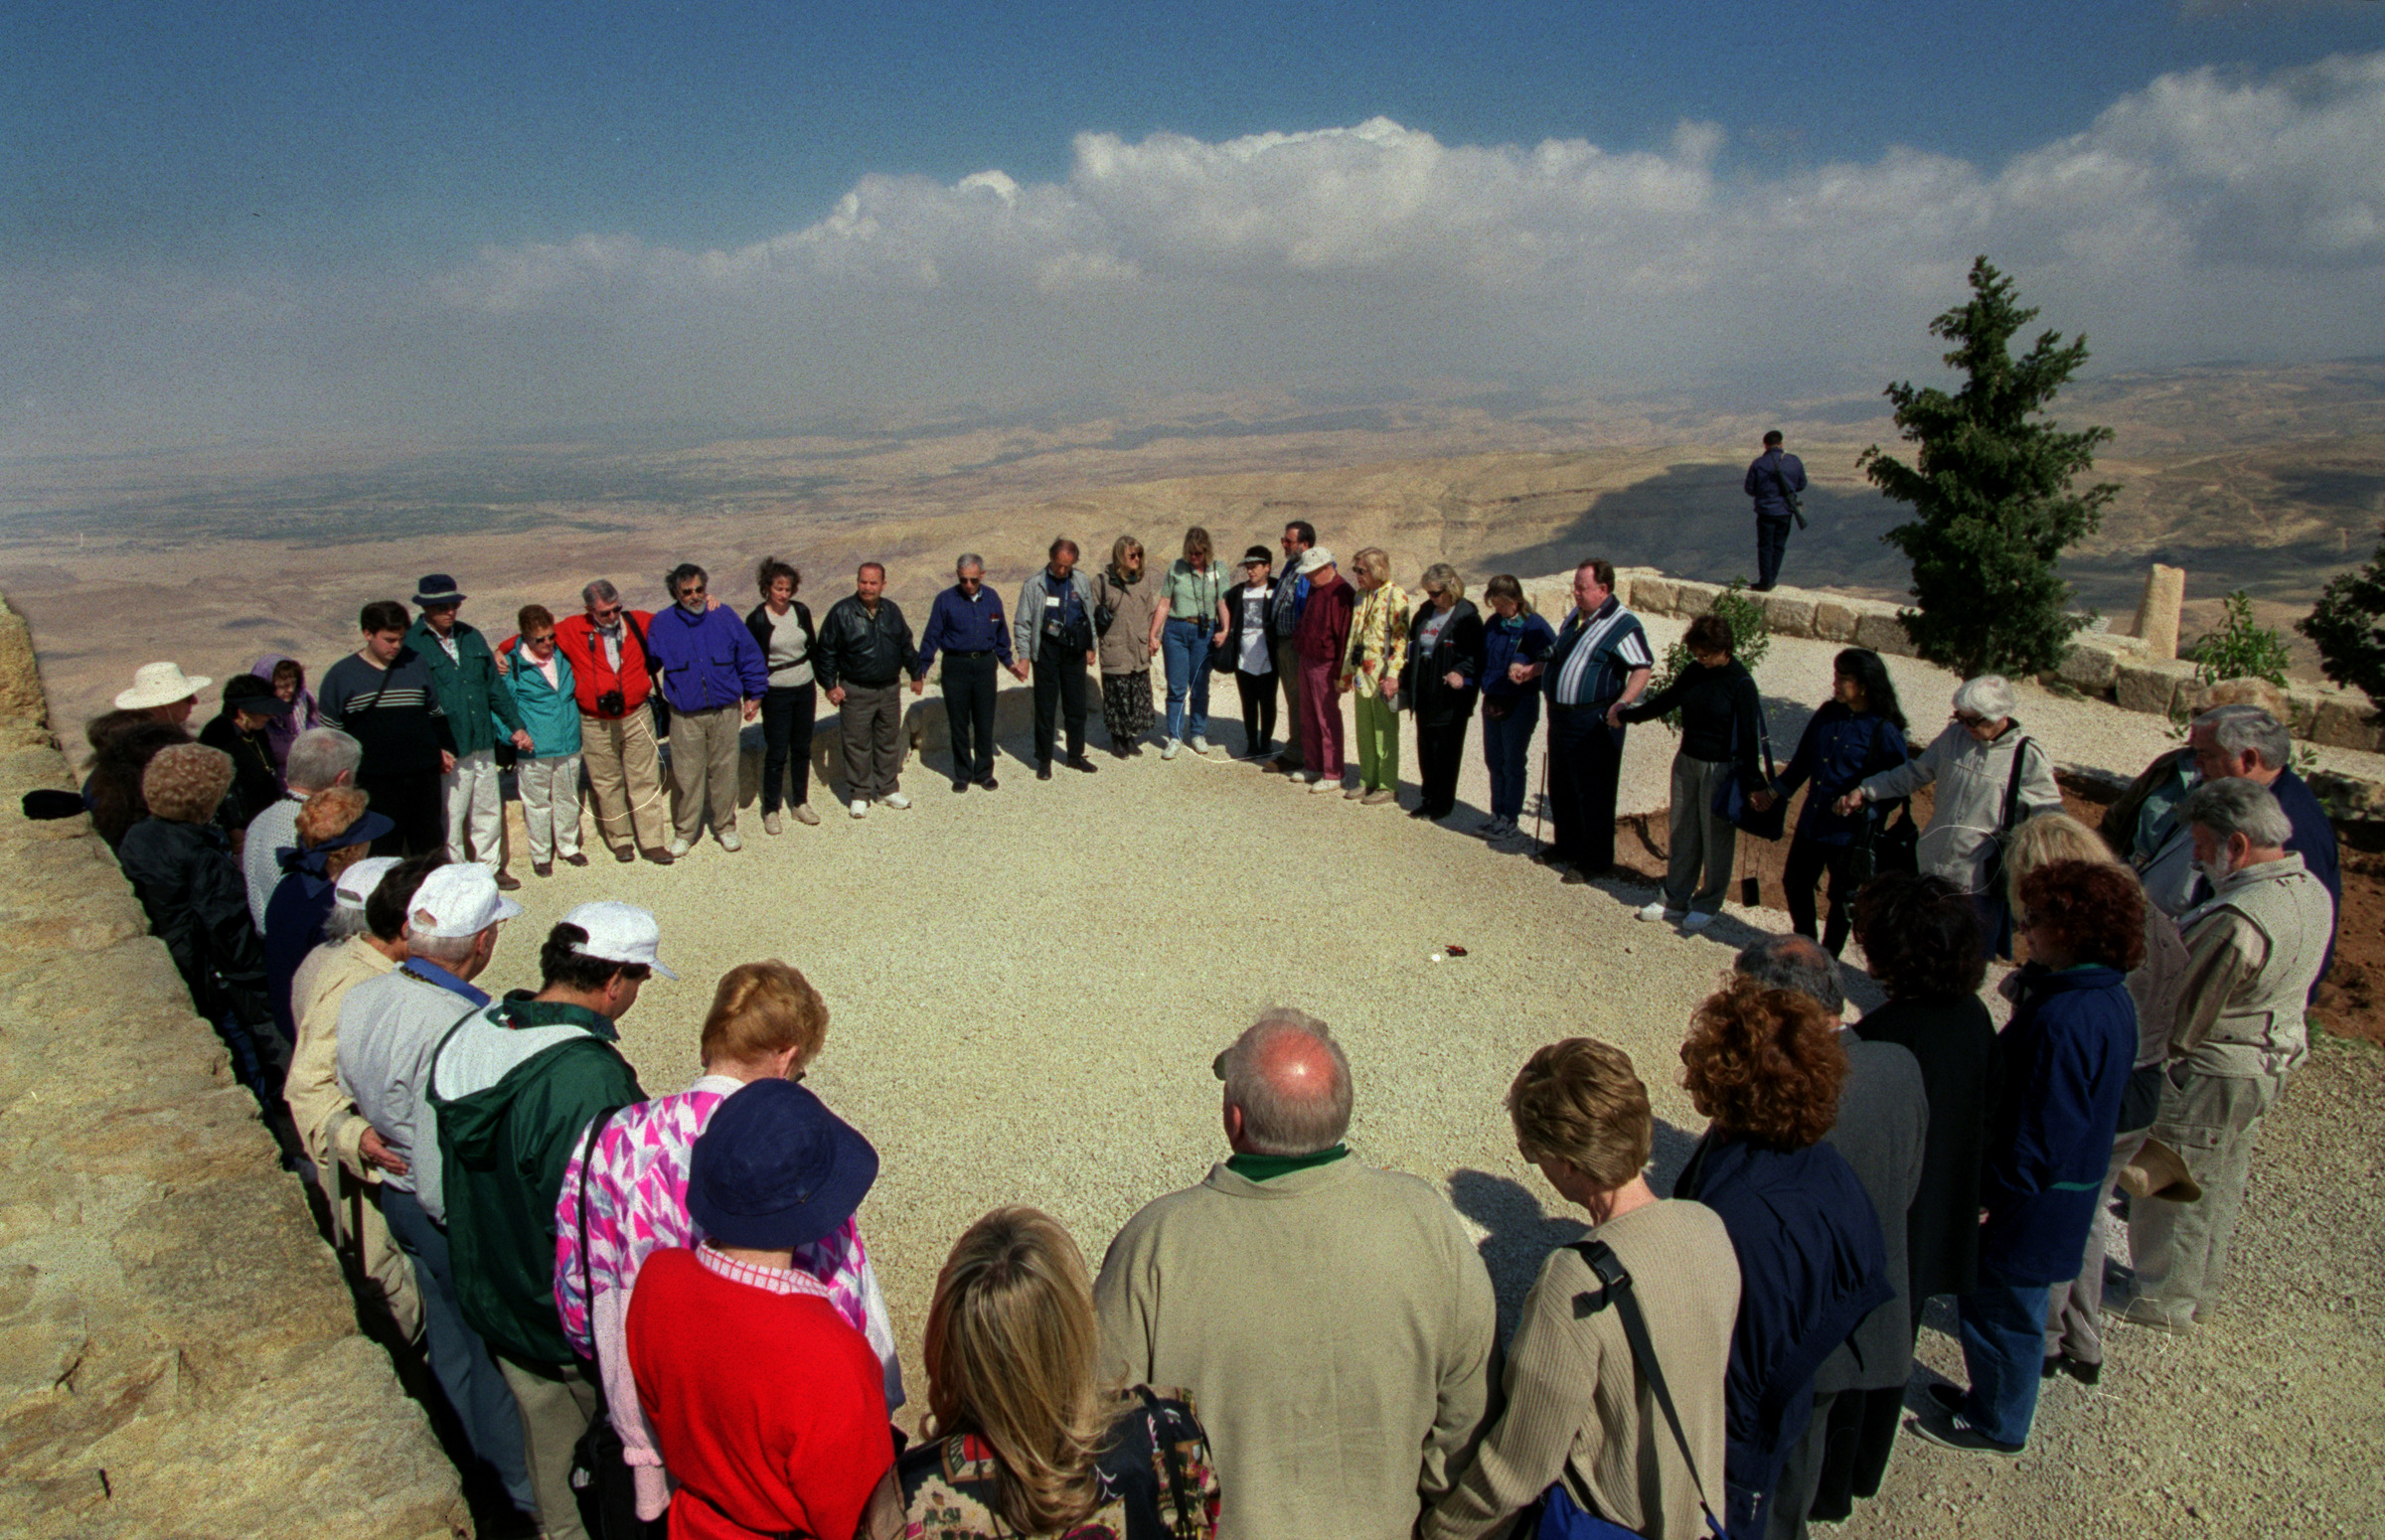  On the top of Mount Nebo, in present day Jordan, Rabi Bernard King leads a Interfaith group prayer in Hebrew over looking the Jordan Valley and the Dead Sea. Historians believe Moses' tomb lies in this region.&nbsp;©Gail Fisher Los Angeles Times 